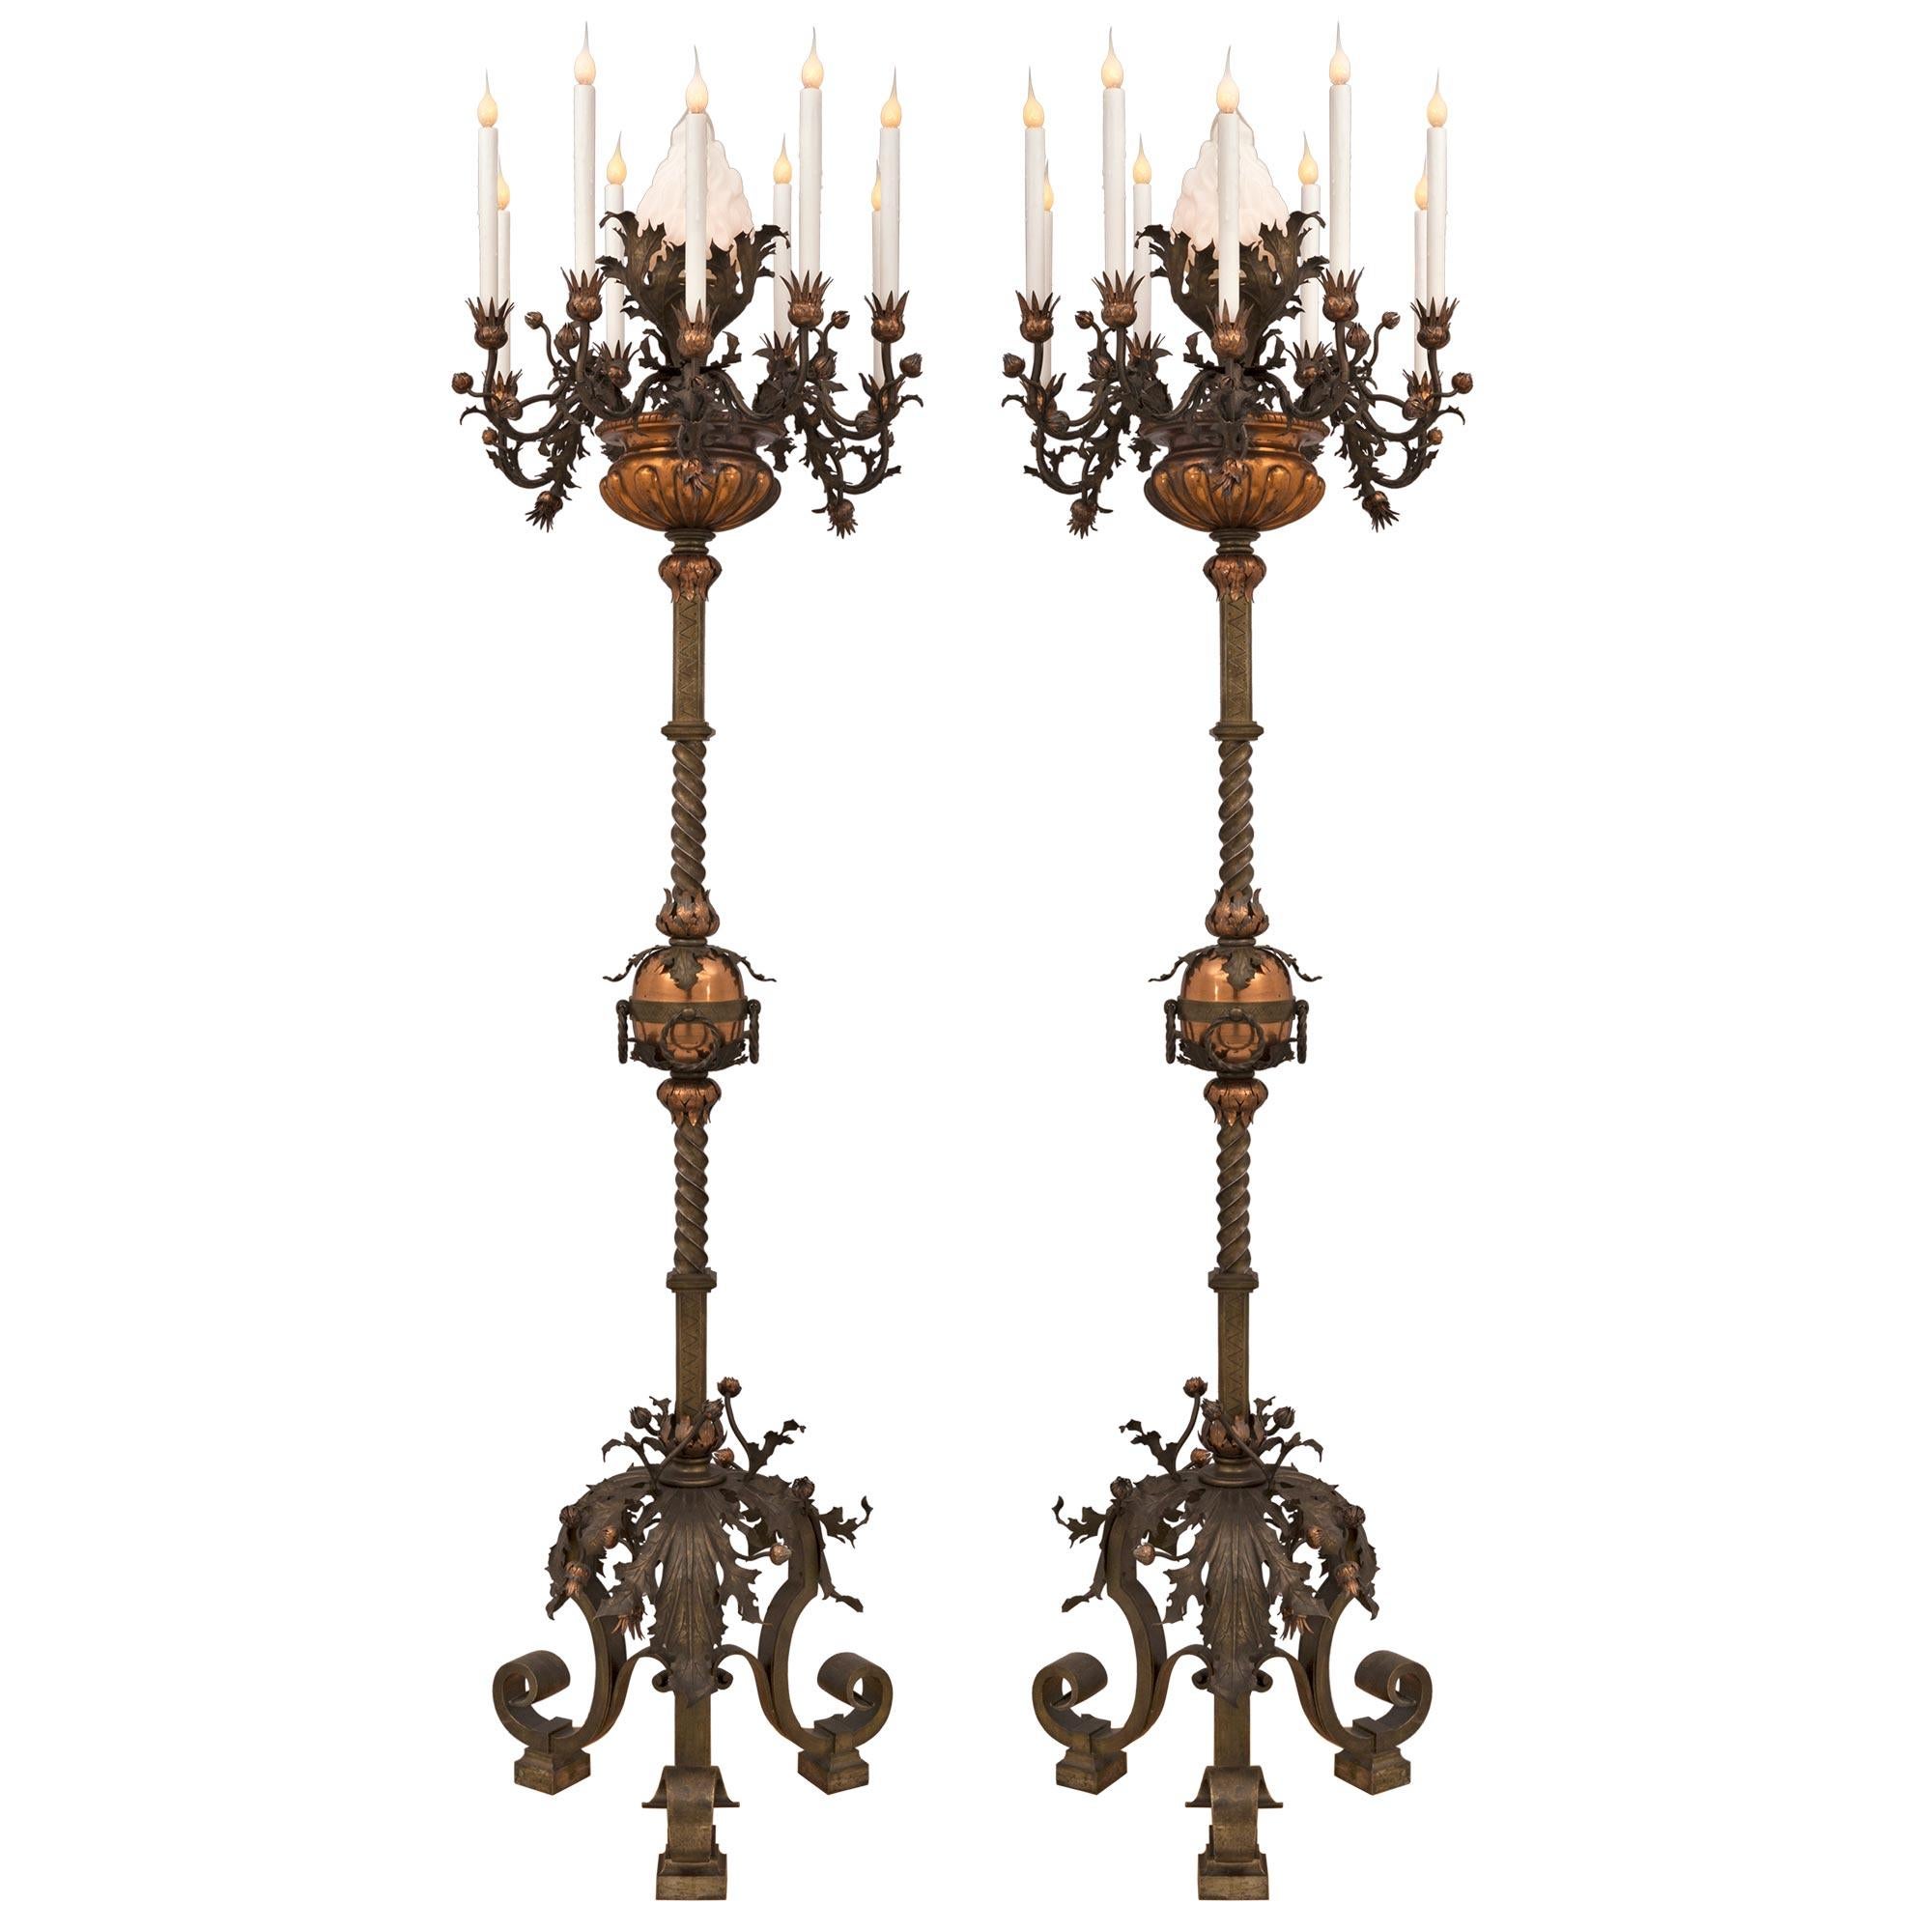 Pair of Spanish 19th Century Patinated Bronze and Copper Torchière Floor Lamps